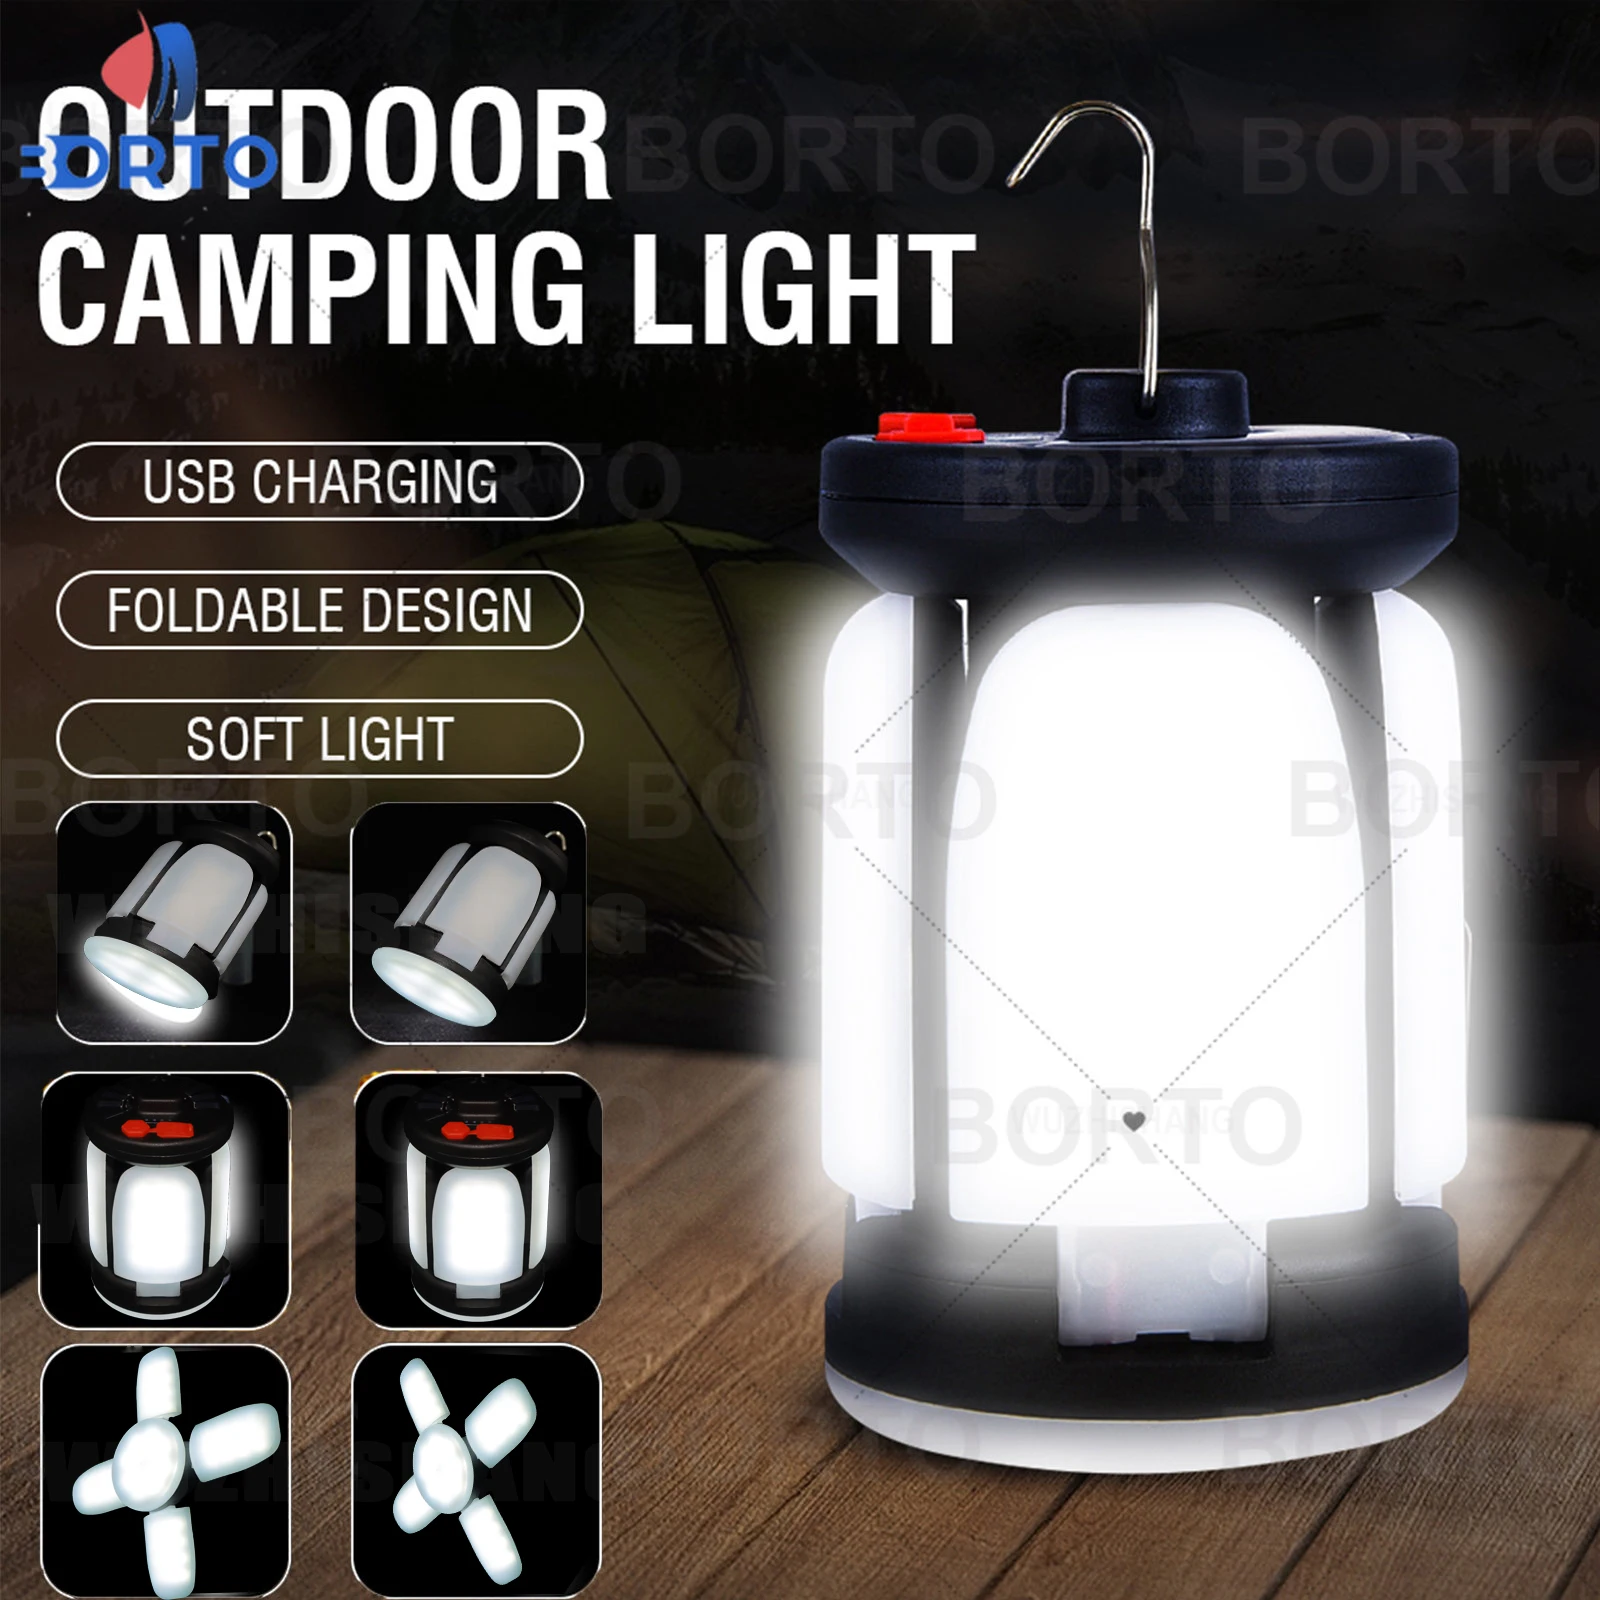 

High Power Solar LED Camping Lantern Rechargeable 4500mAh 1000LM Emergency Power Bank Foldable 6 Light Modes for Camping Fishing